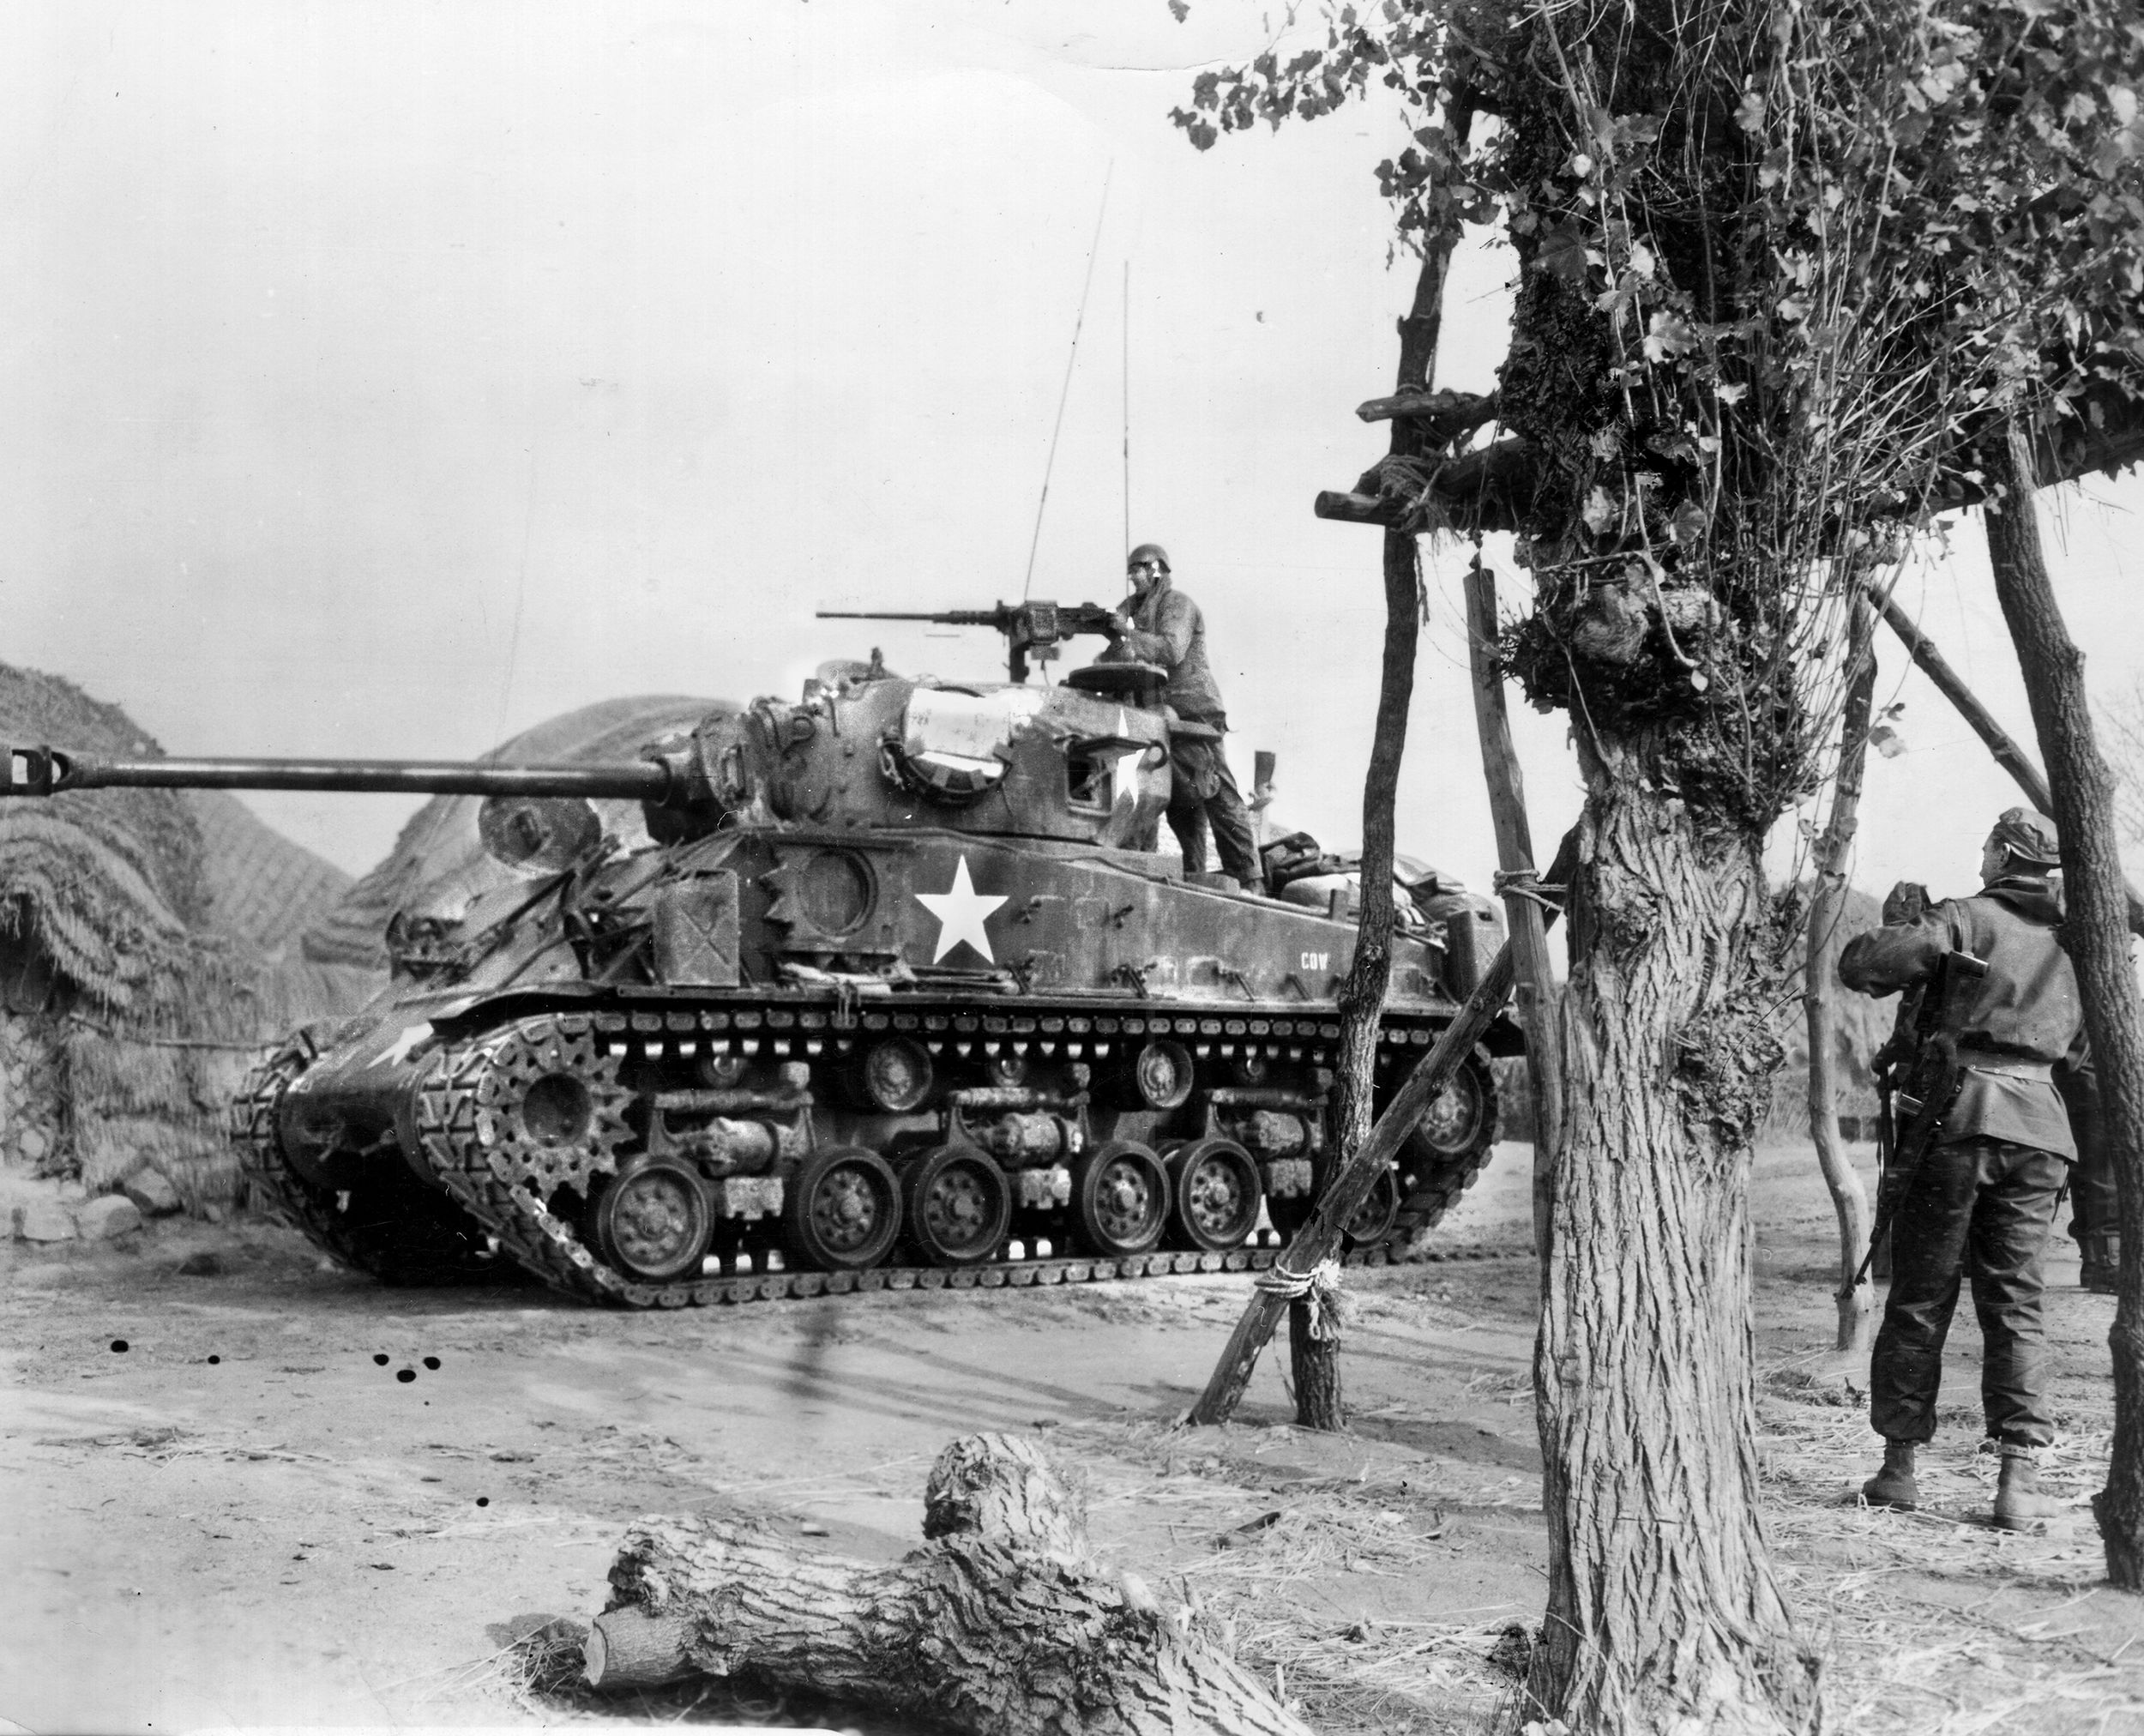 An M4 Sherman of the 89th Medium Tank Battalion accompaning the 61st Middlesex fires on North Korean targets. Though most of the North Korean armor was destroyed by air, the Soviet T-34/85 tanks used by the NKPA were no match for the American Sherman and Pershing tanks.